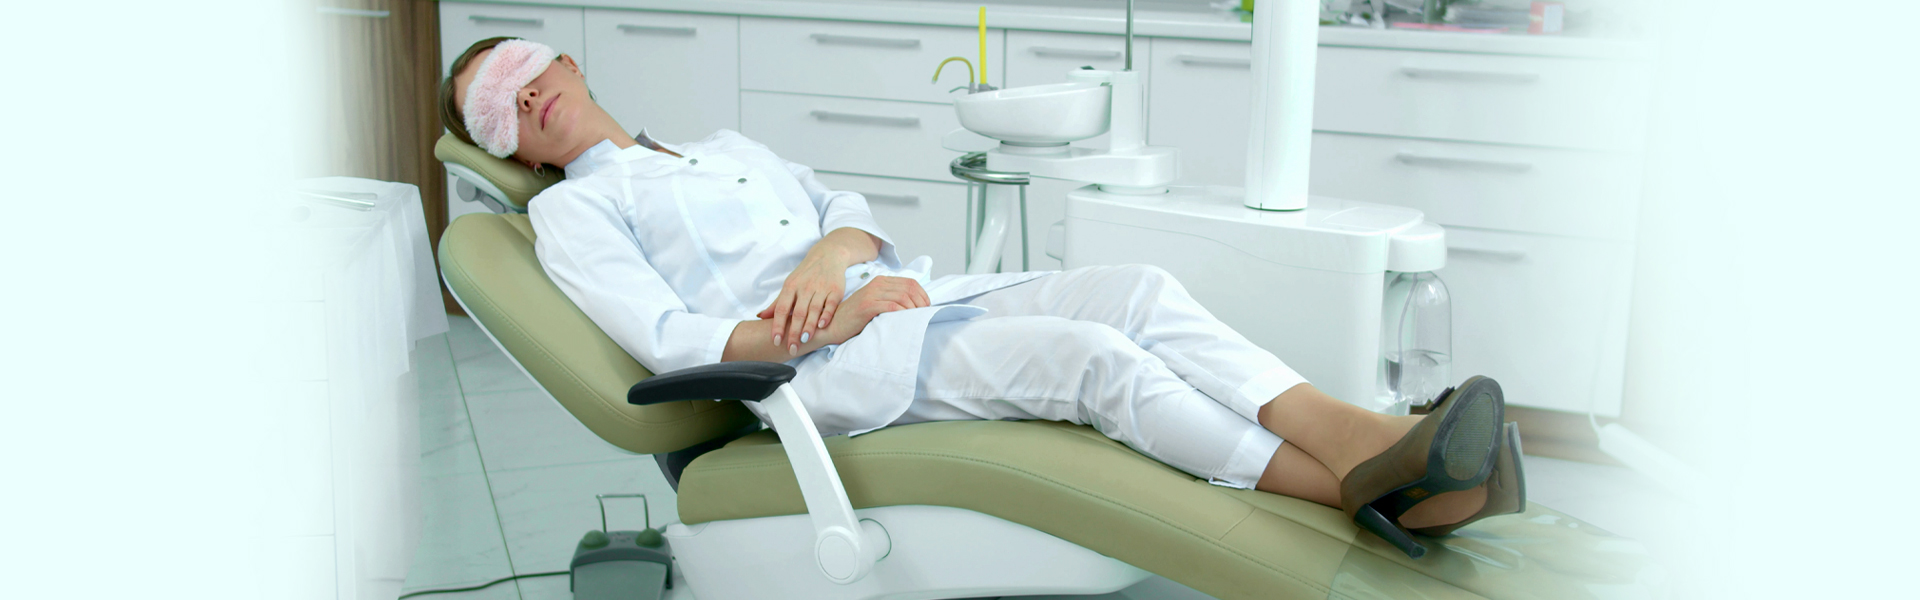 Sedation Dentistry Makes You Comfortable on Dentist's Chair